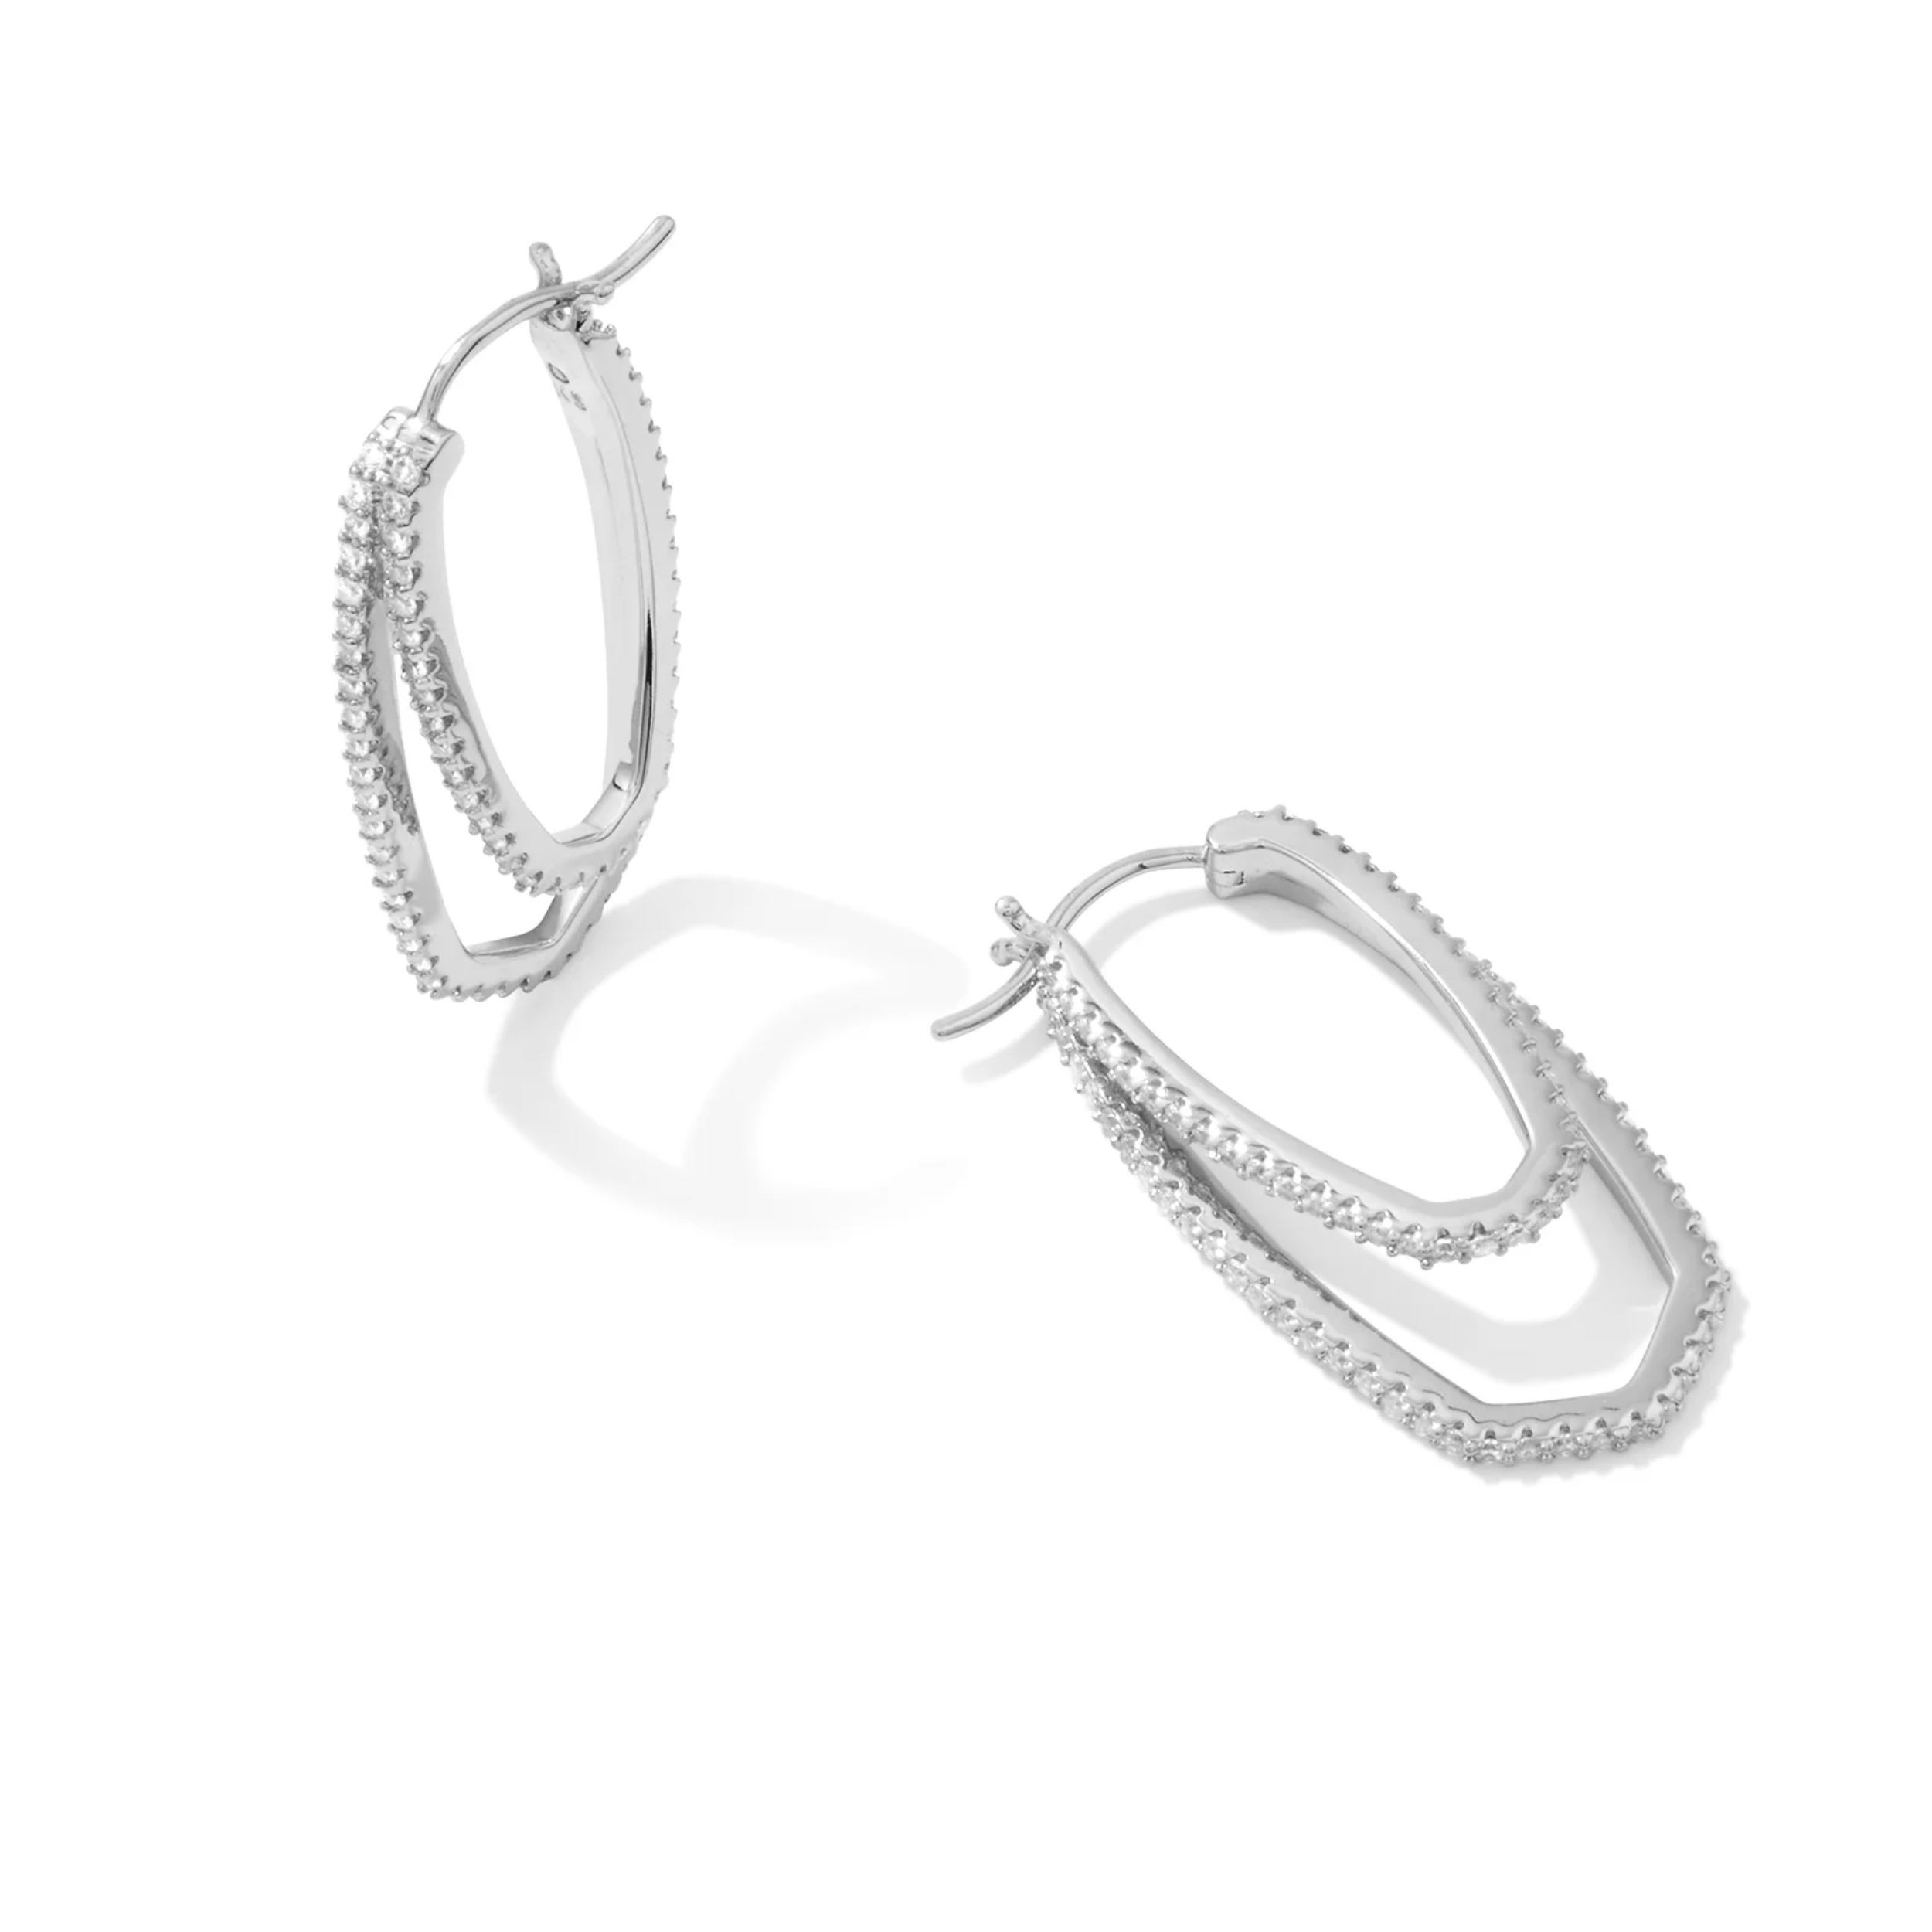 Kendra Scott | Murphy Silver Hoop Earrings in White Crystal - Giddy Up Glamour Boutique